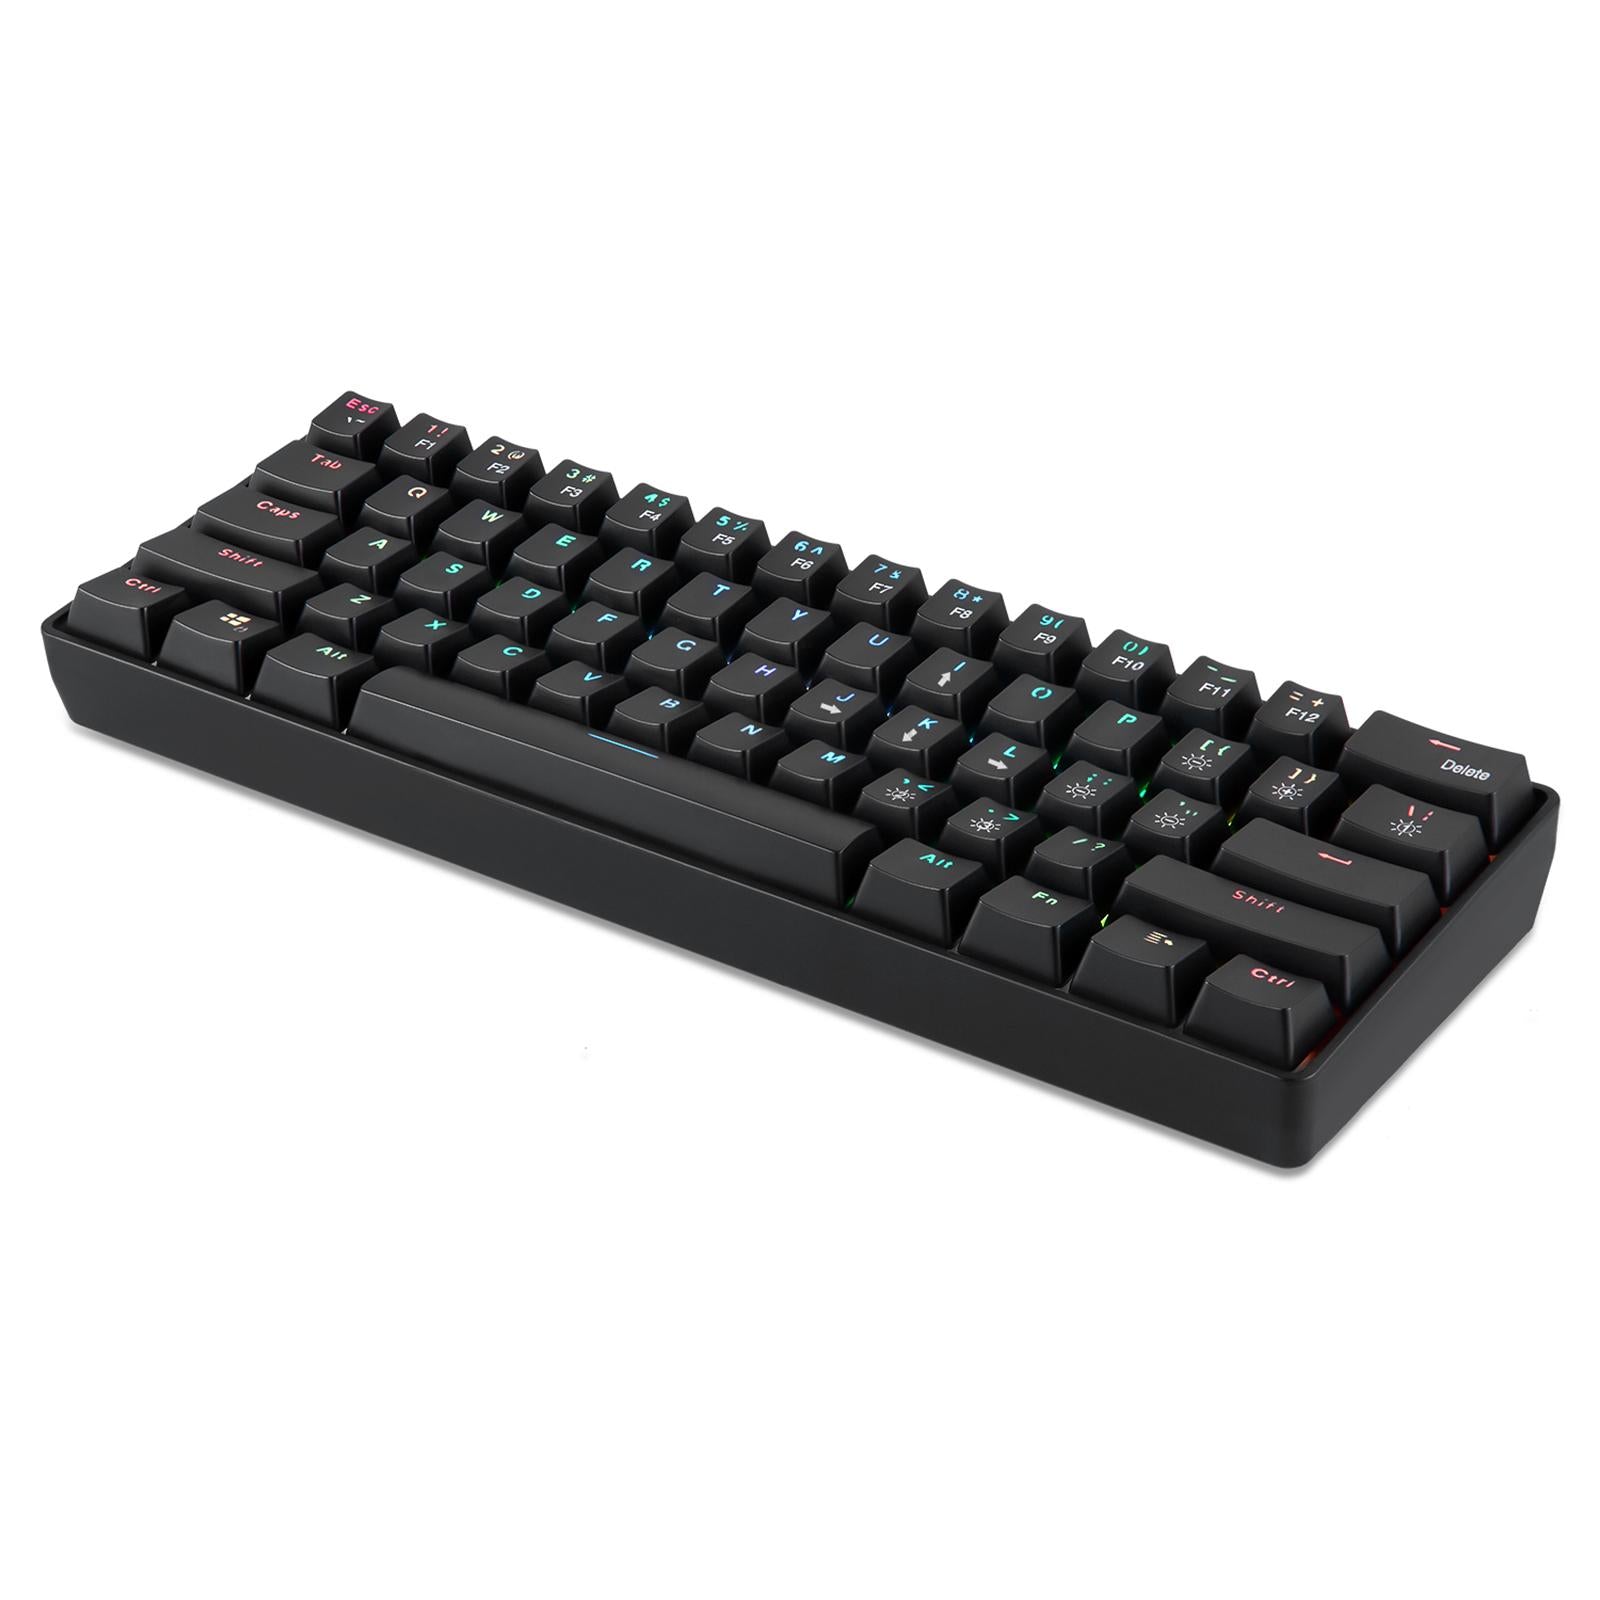 YK600 Mechanical Keyboard RGB Backlight Keyboards for PC Gamer Red Switch